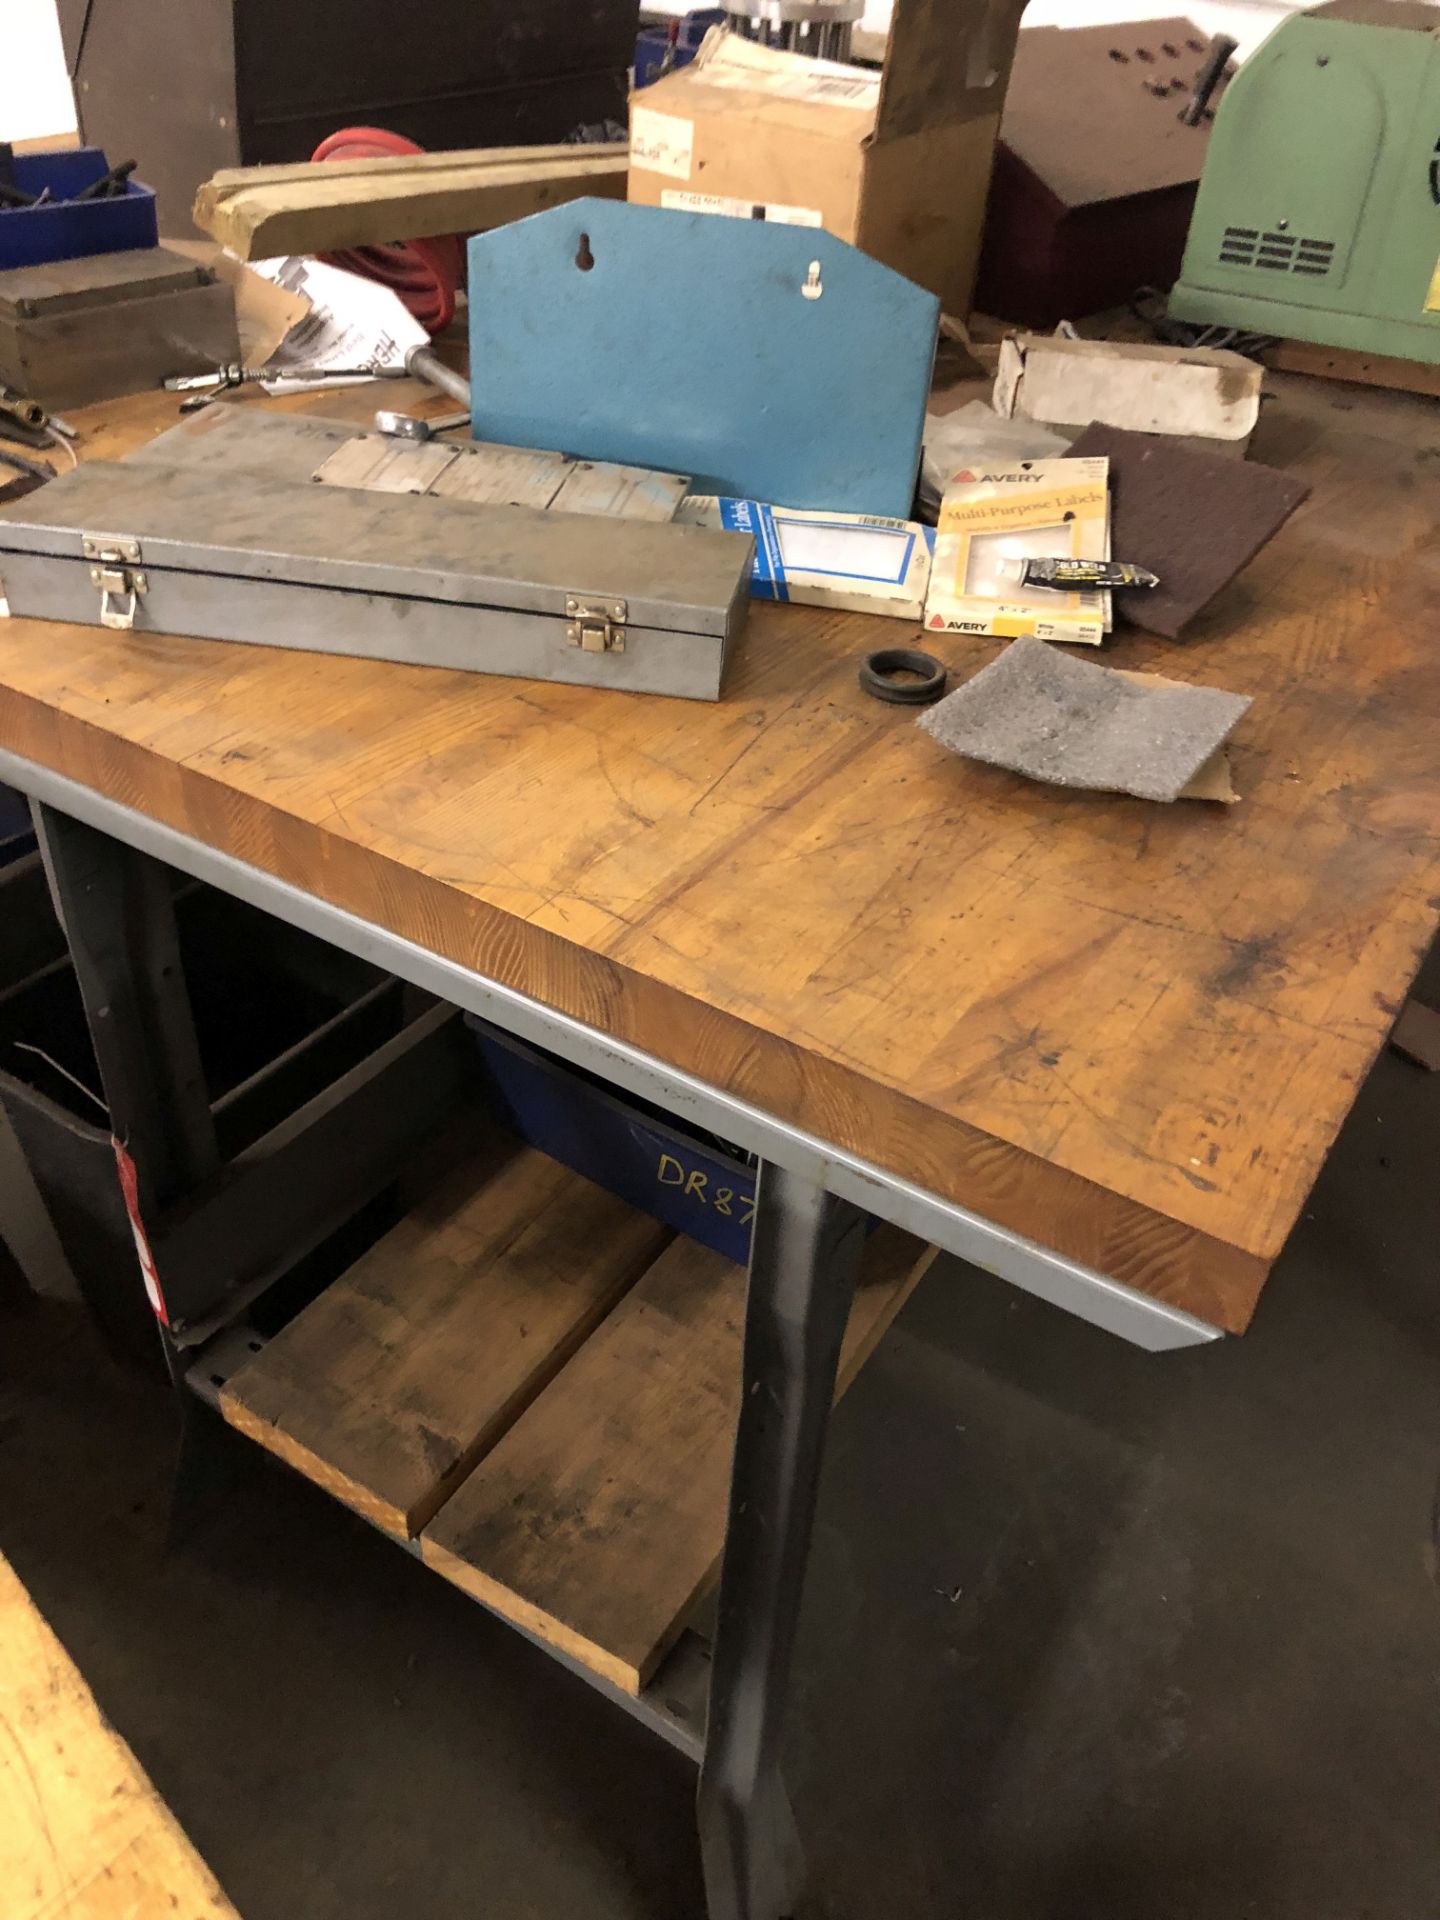 METAL WORK BENCH WITH WOOD TOP, 6' LONG x 3' WIDE x 34'' TALL [CONTENTS ON BENCH NOT INCLUDED] [ - Image 2 of 2